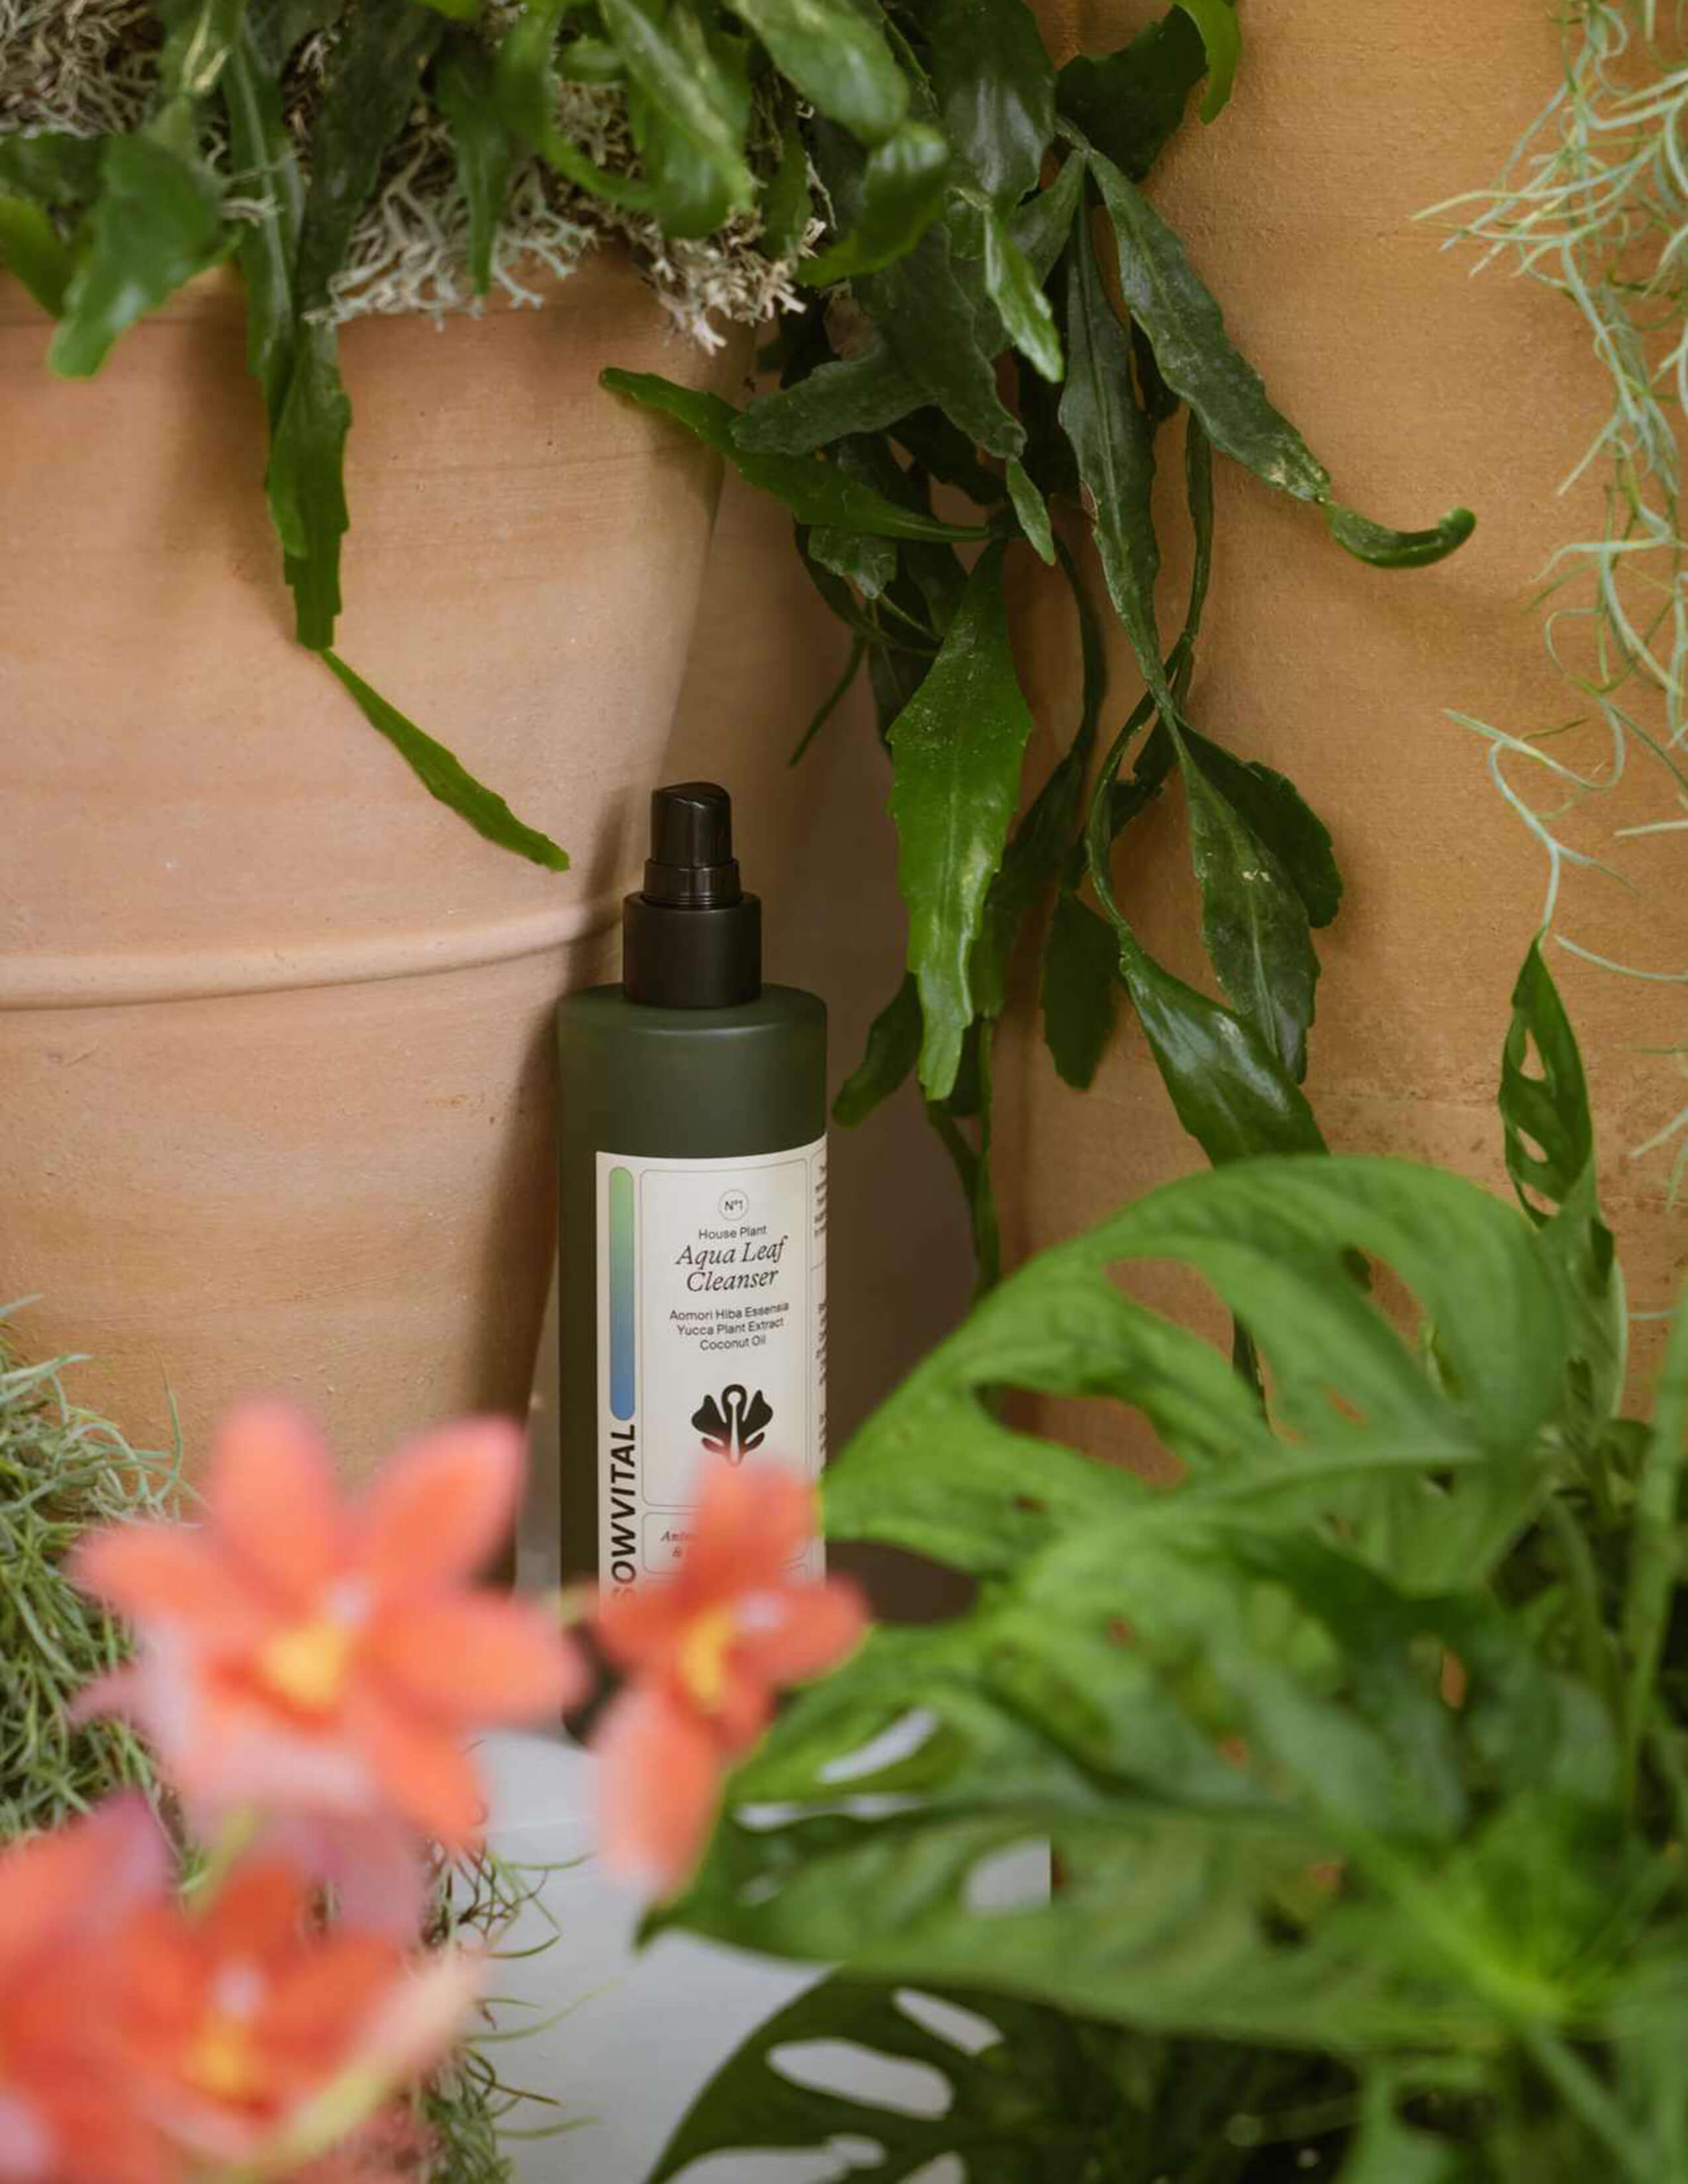 The Sowvitla product - aqua leaf cleanser, surrounded by Cheerful Orchid Cactus Epiphyllum pumilum, Monstera - Monkey Mask and some pinky flowers.